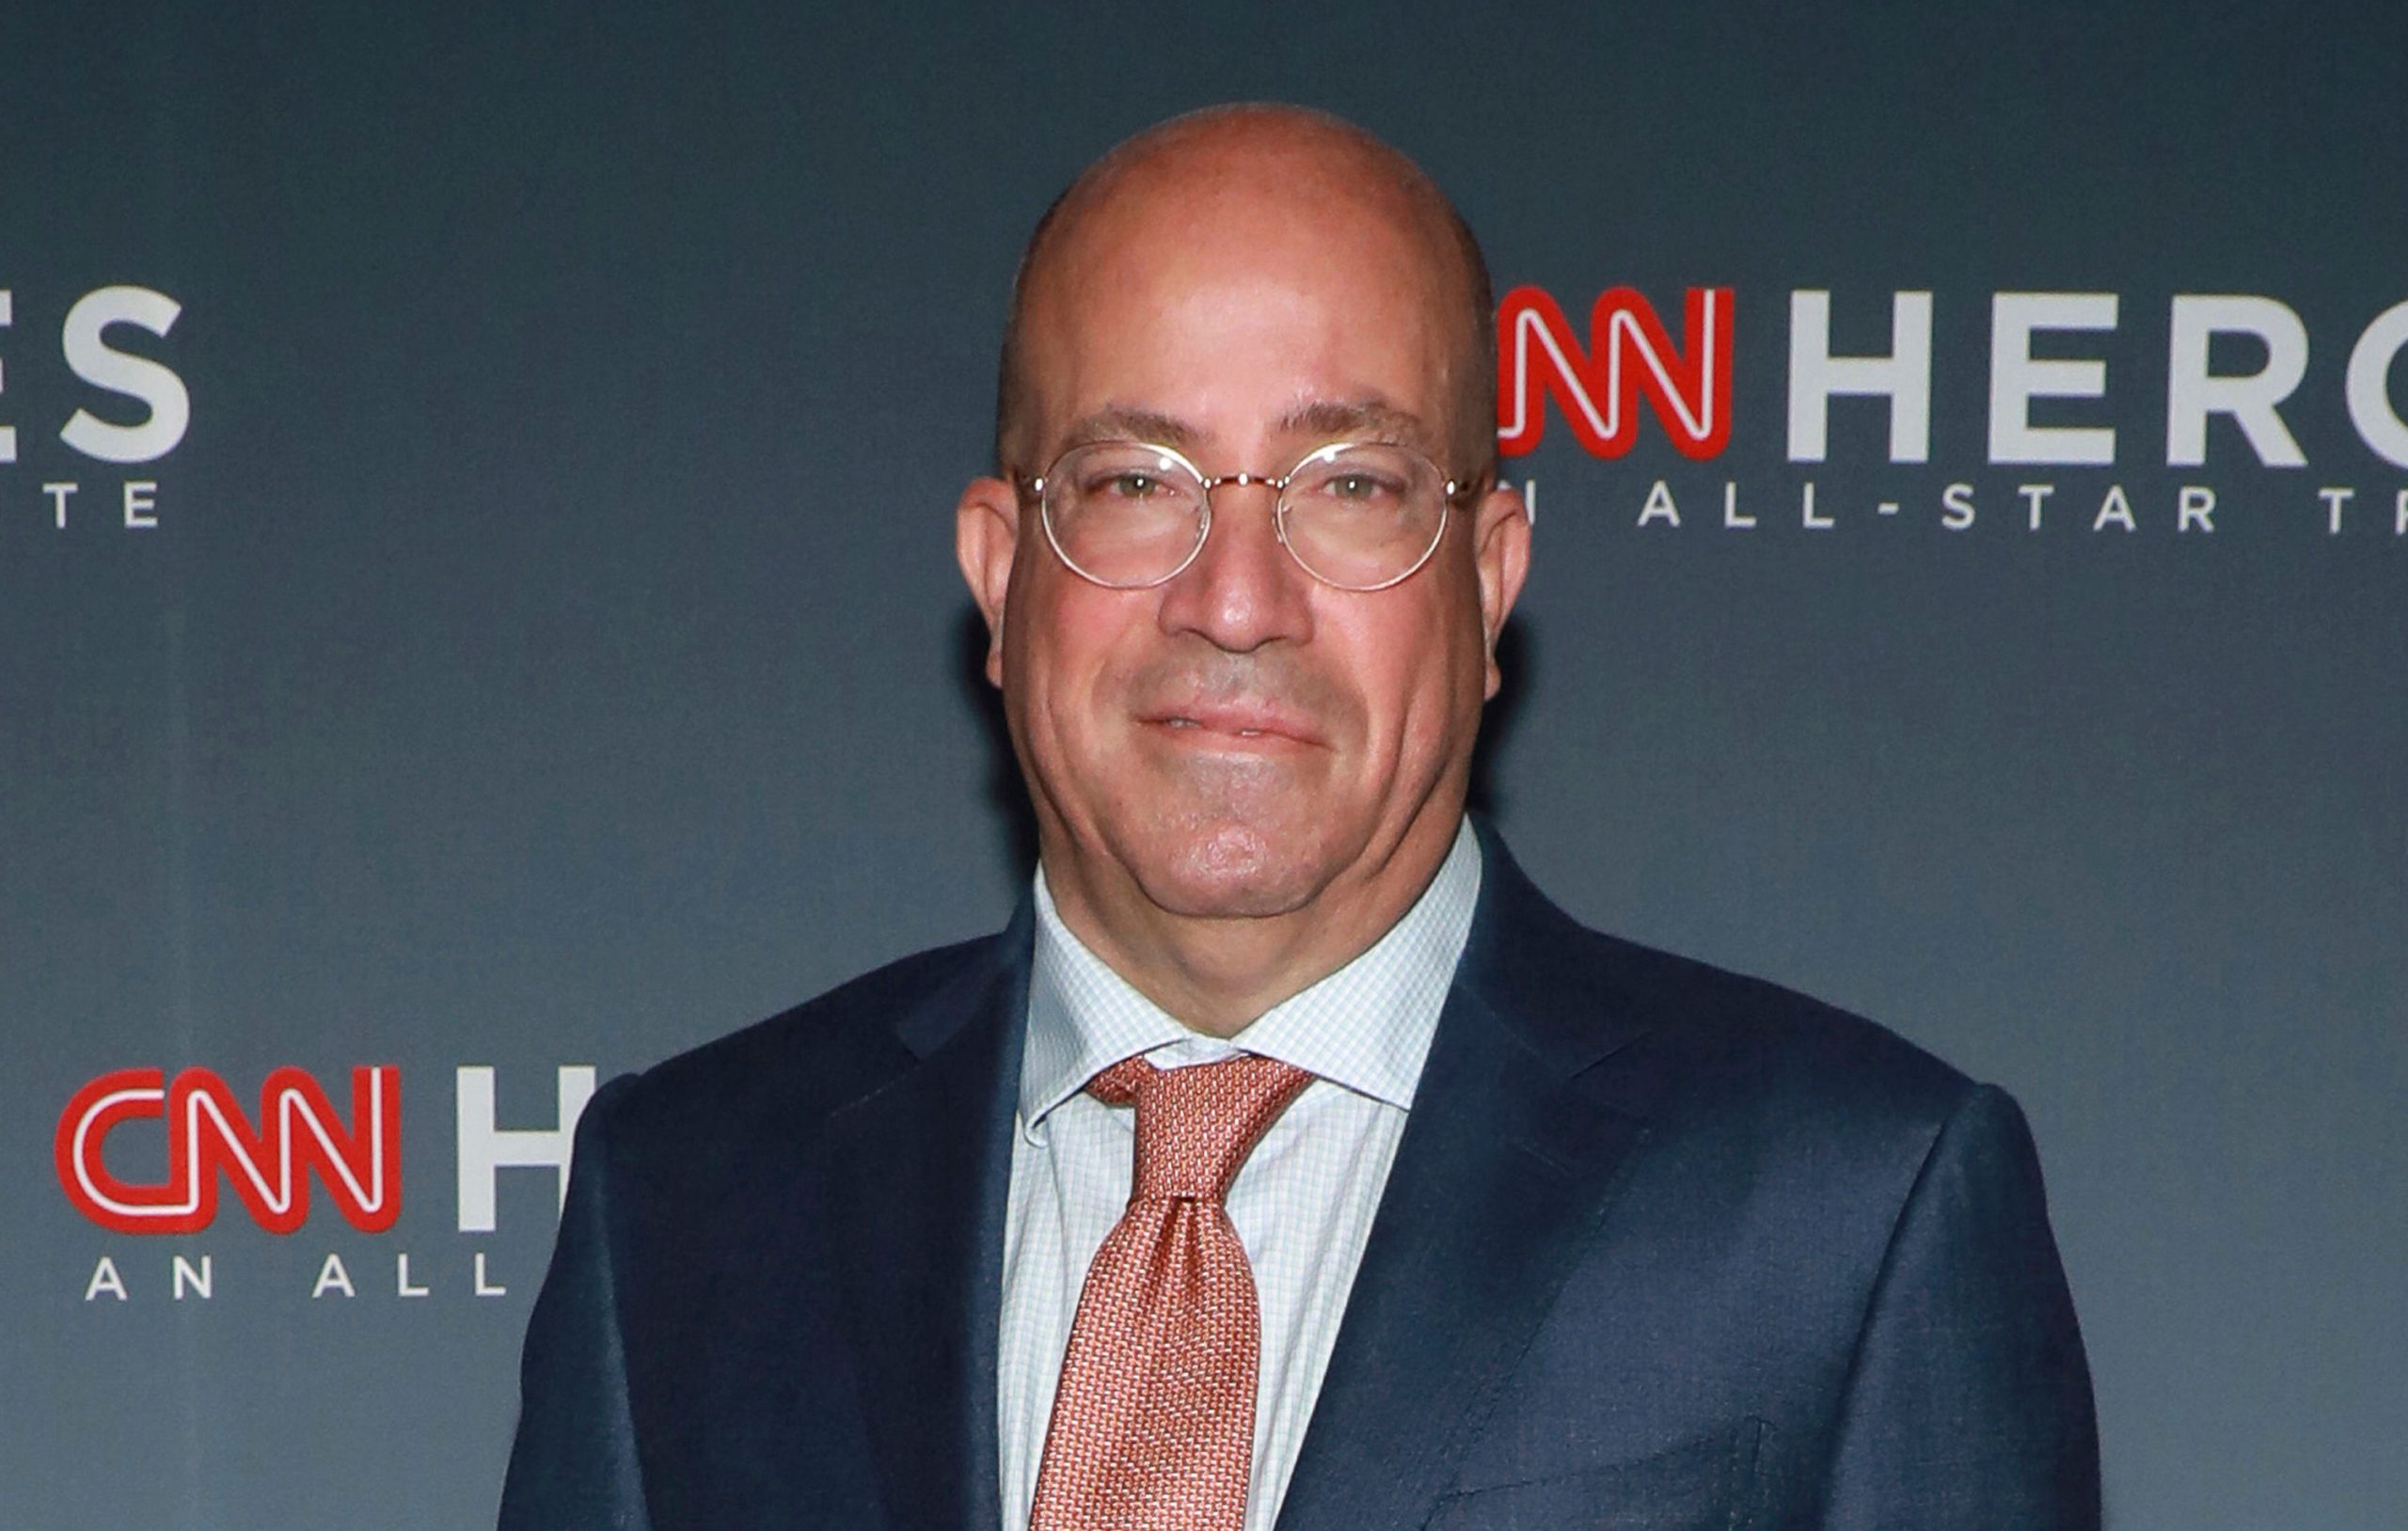 Jeff Zucker height, wife, net worth and other details